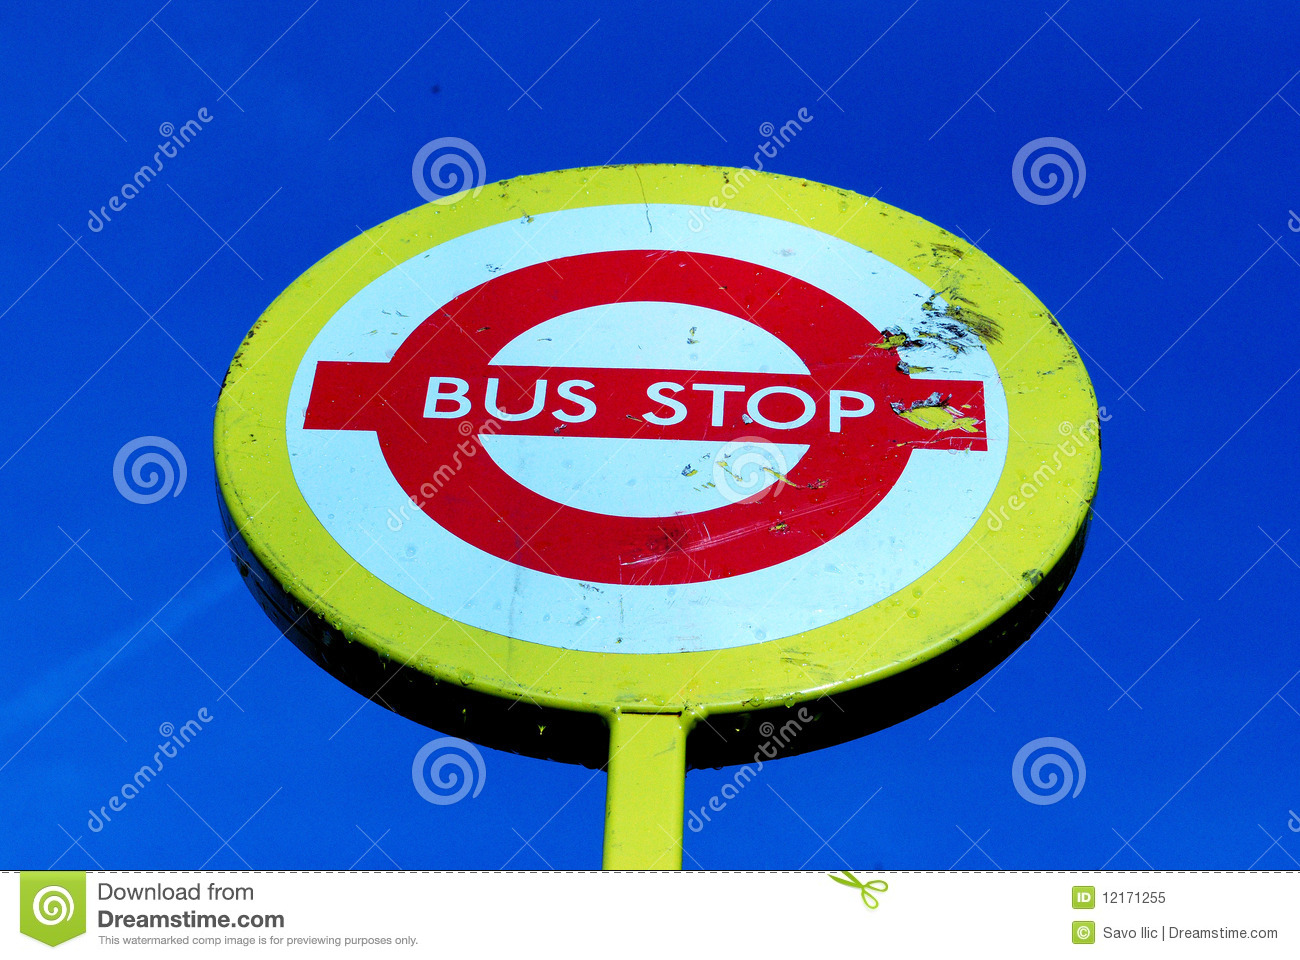 Bus Stop Sign Royalty Free Stock Photo   Image  12171255